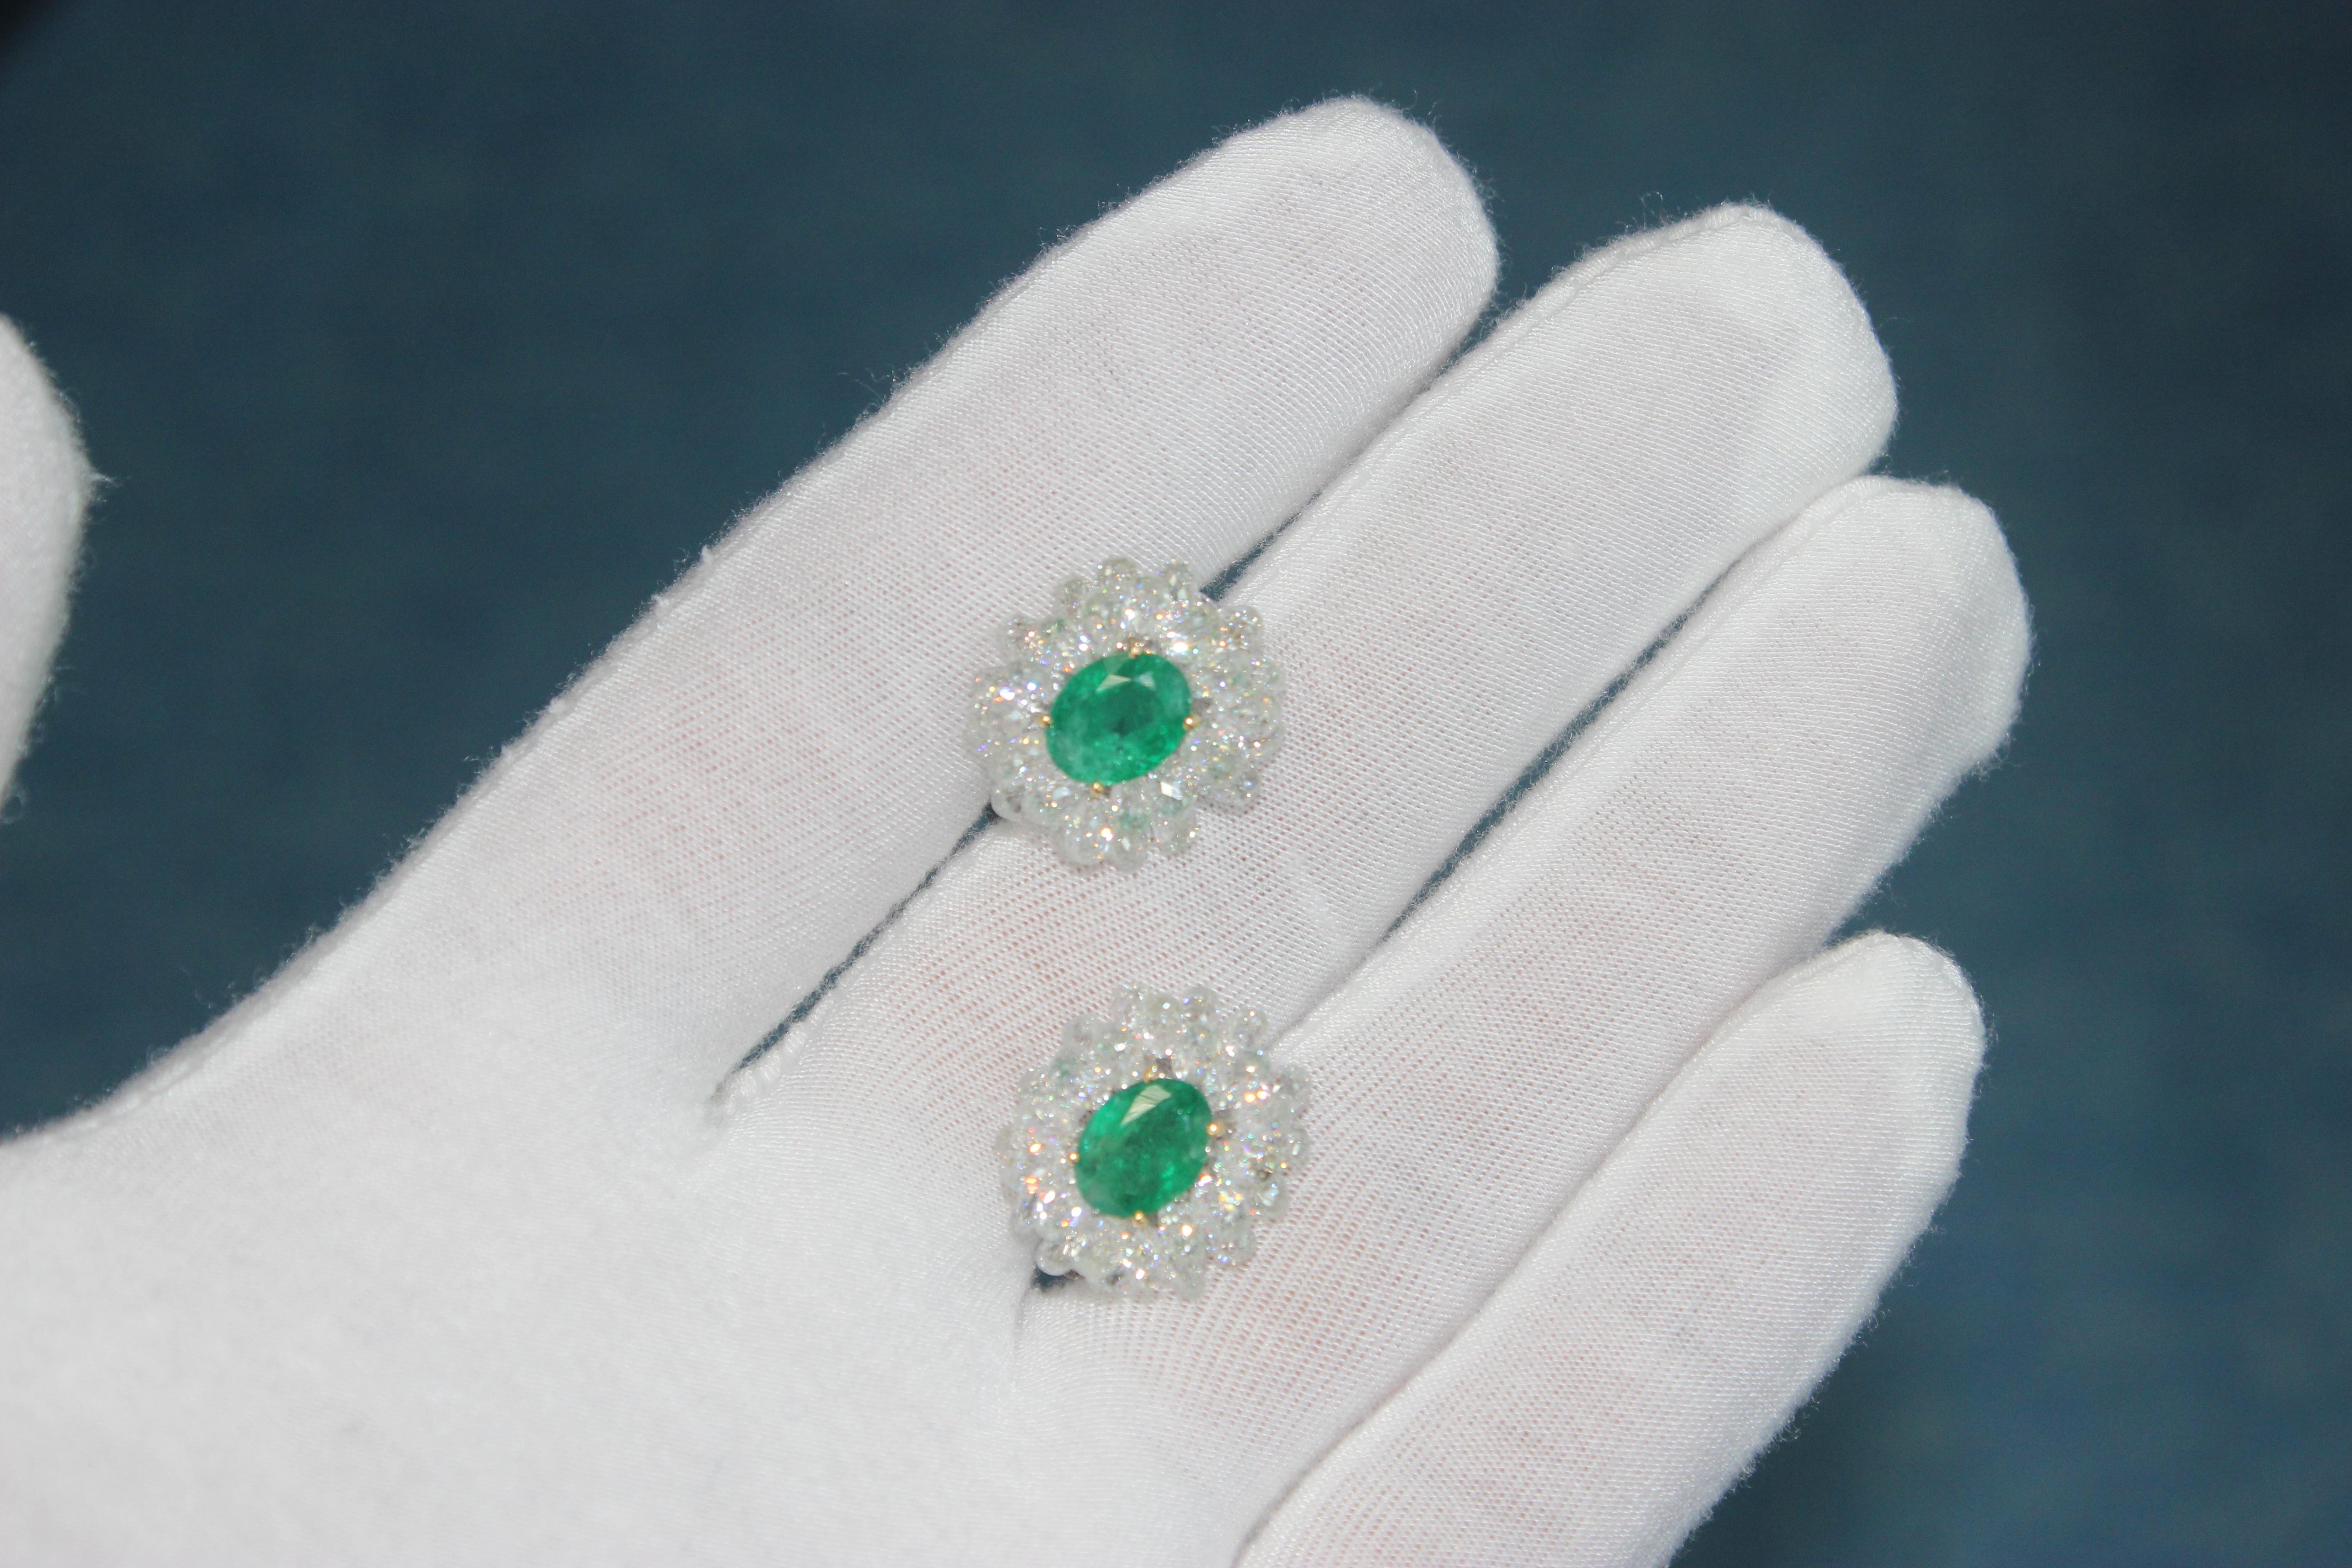 PANIM Diamond Briolette and Emerald 14k White Gold Cluster Earrings

The combination of green emerald and diamond in these earrings makes for a truly elegant and eye-catching piece of jewelry. Emeralds are said to symbolize rebirth and renewal,